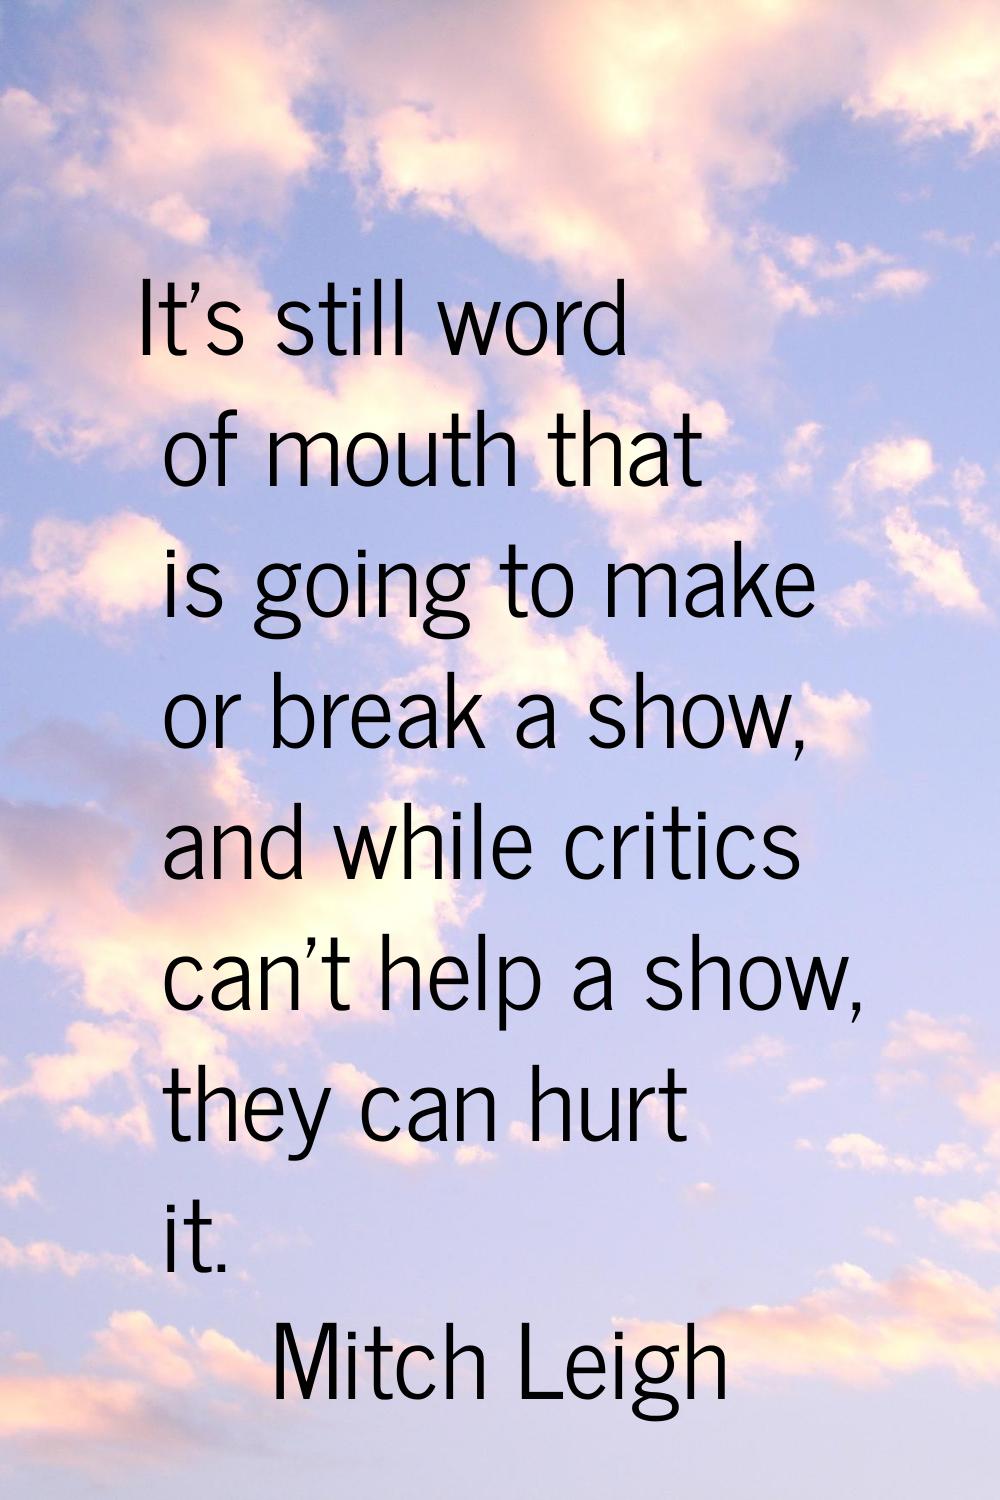 It's still word of mouth that is going to make or break a show, and while critics can't help a show